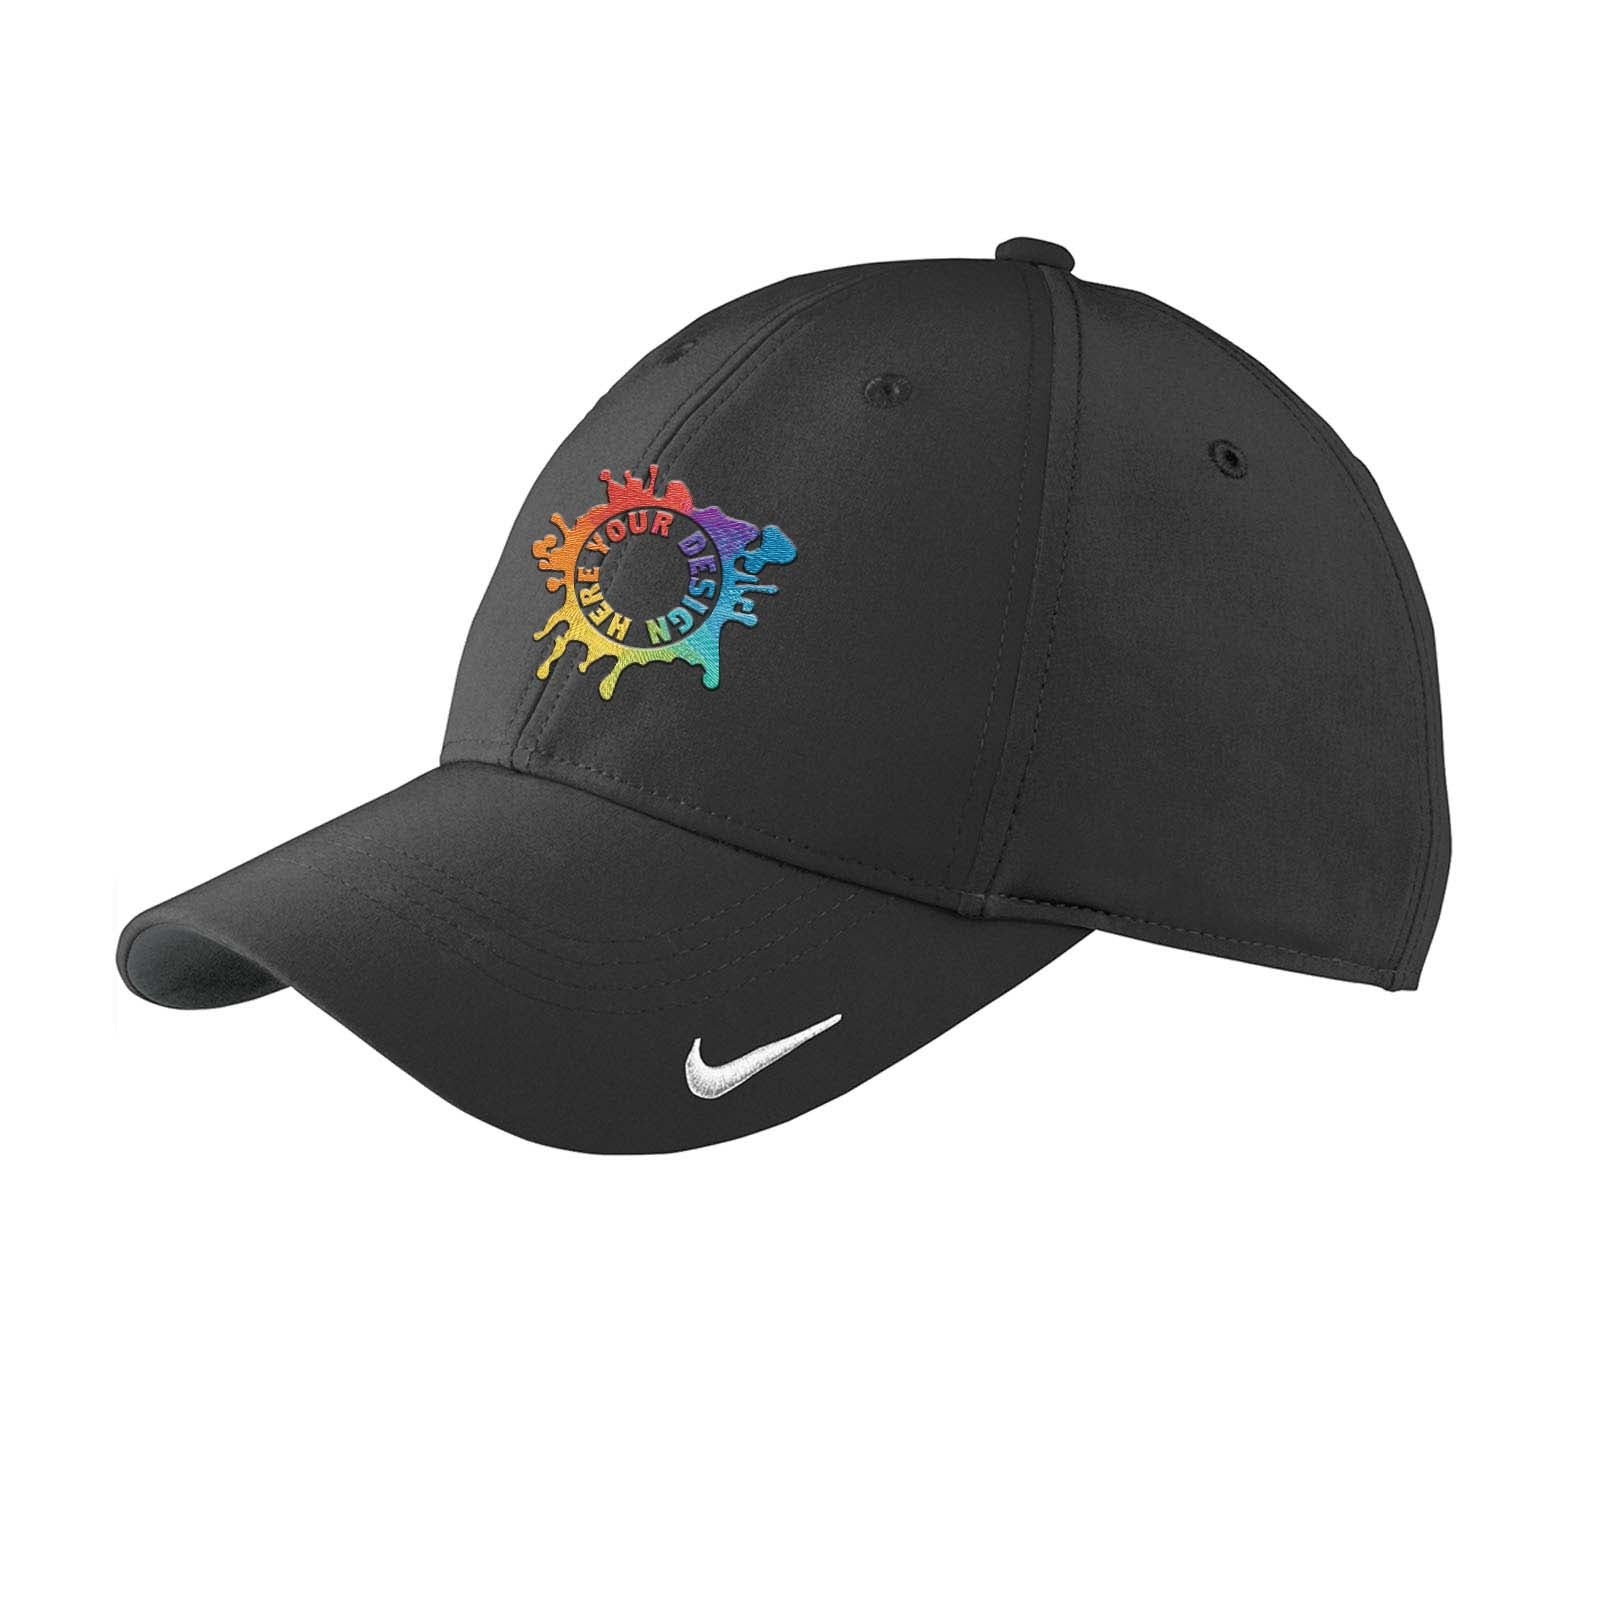 Nike Swoosh Legacy 91 Cap Embroidery - BEST SELLING GOLF HAT